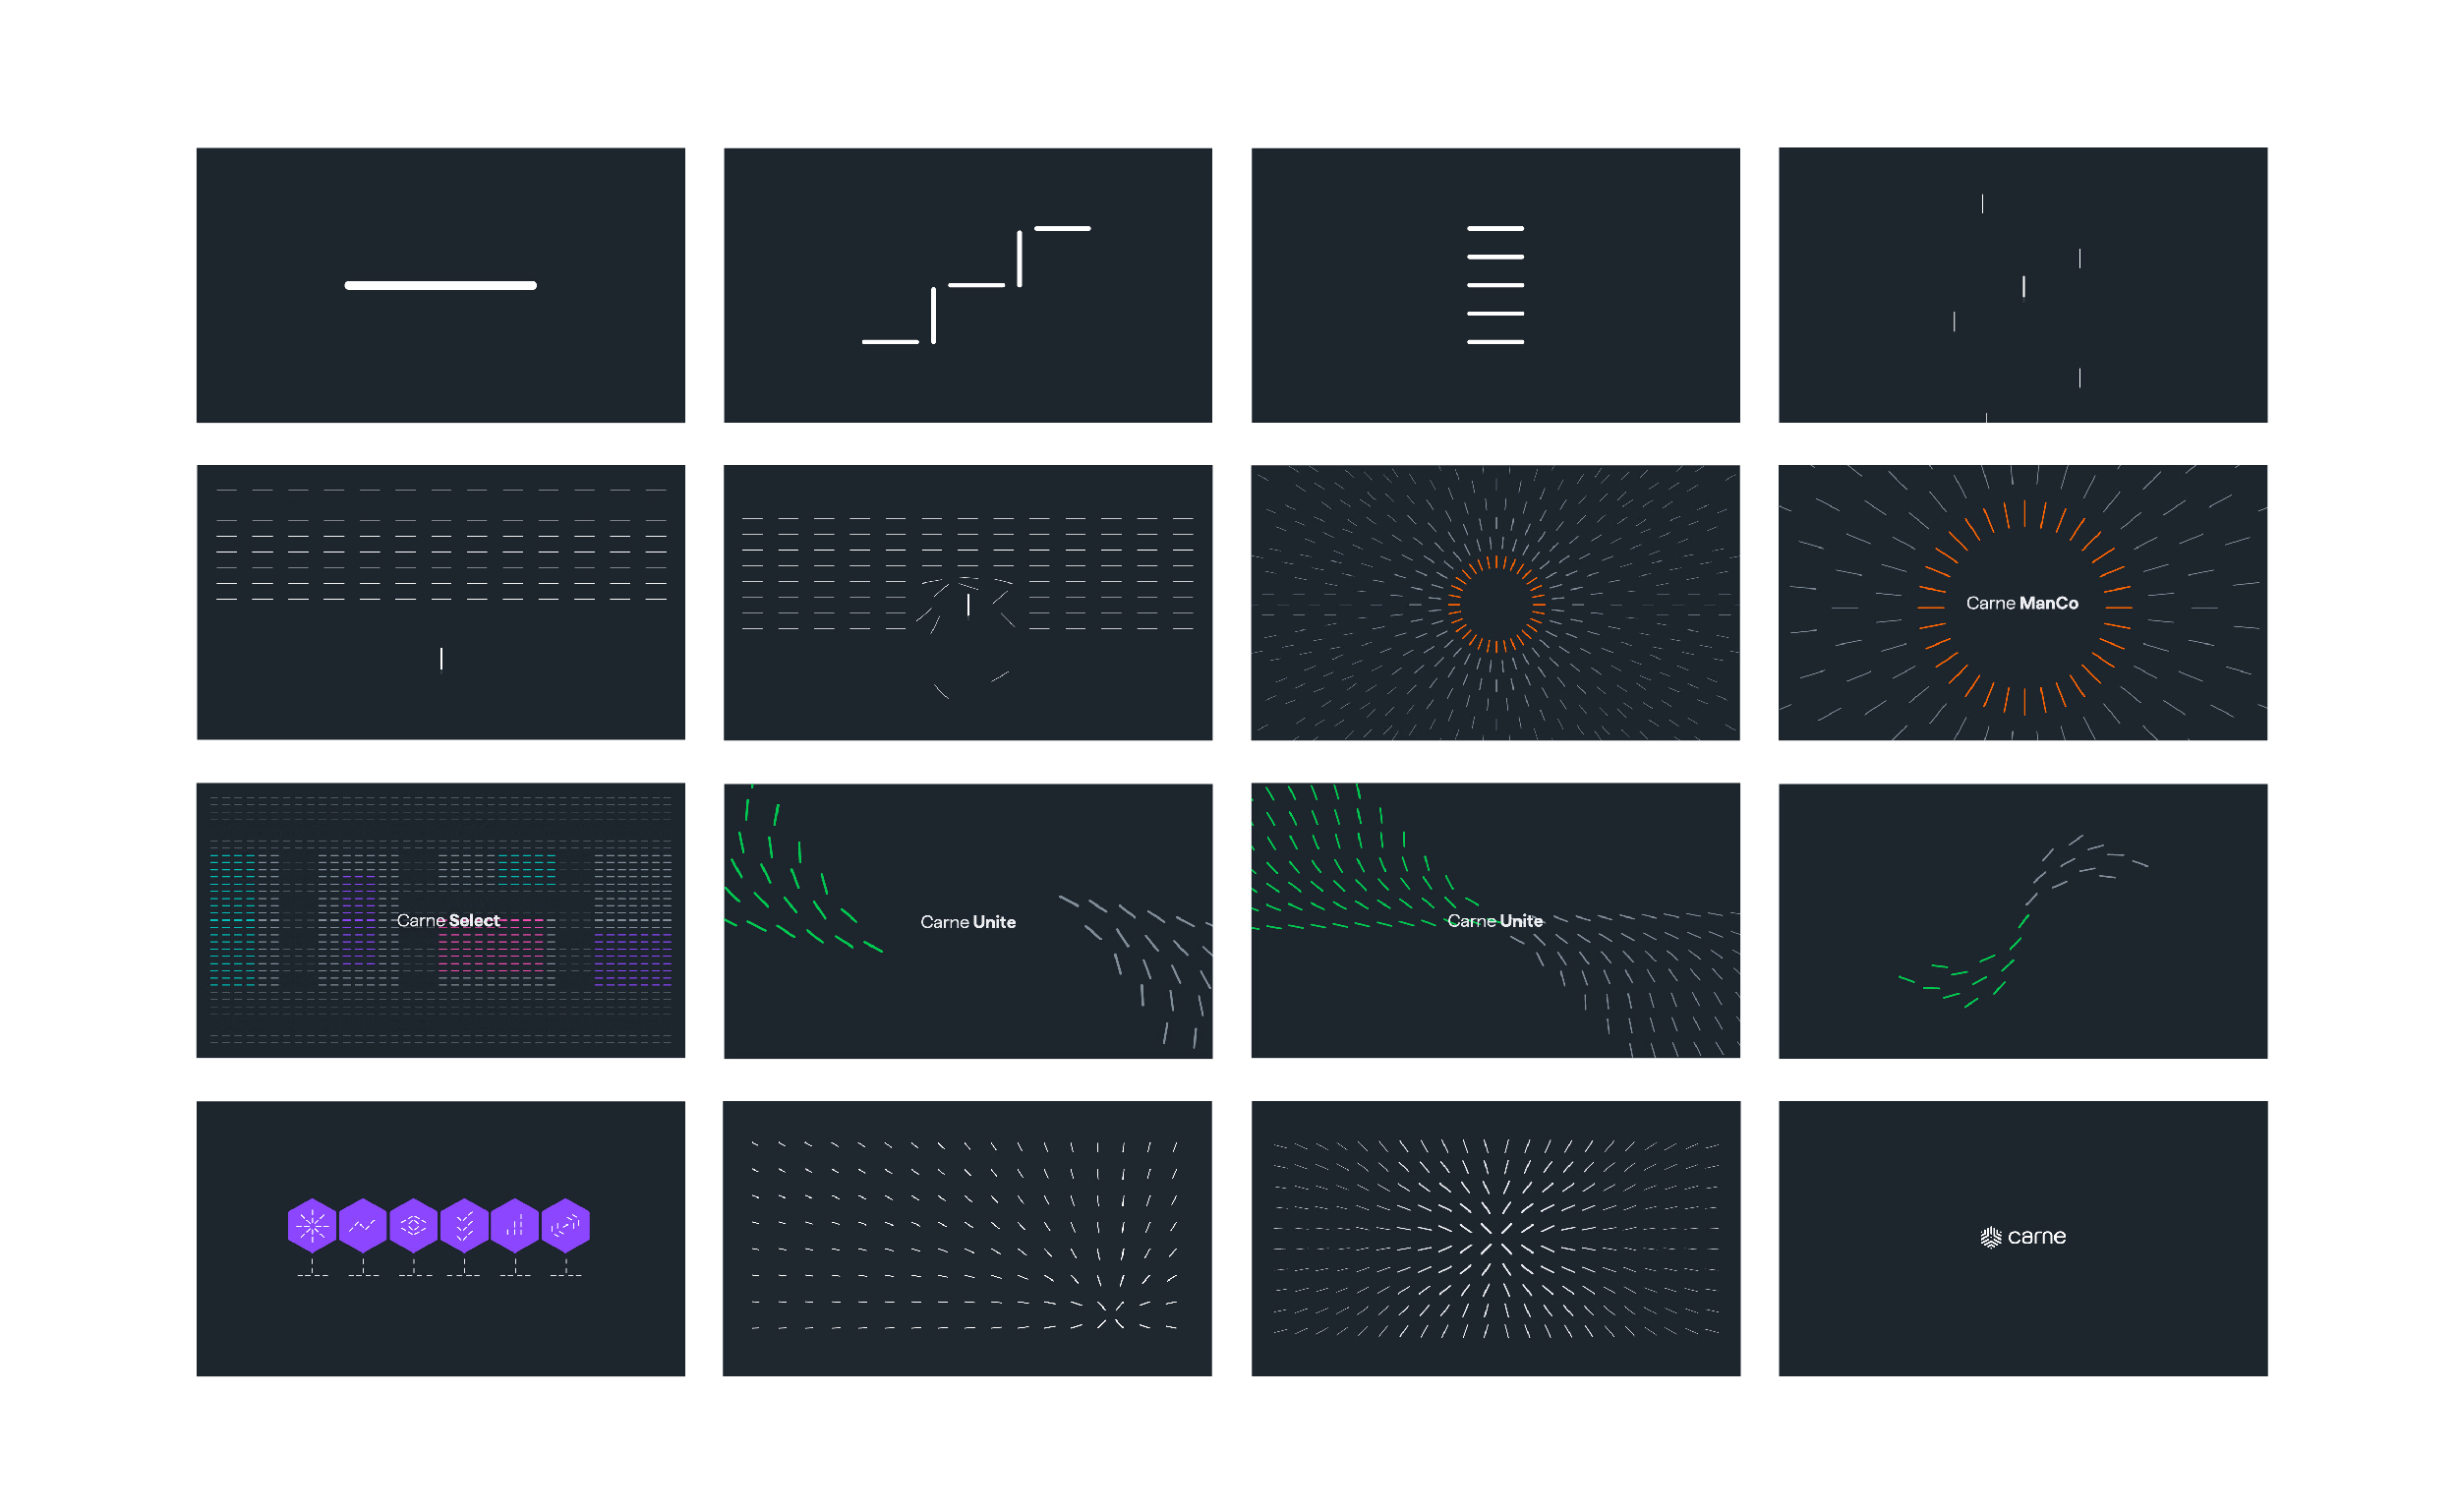 Storyboard snippet of brand animation depicts graphic lines as fragmented data